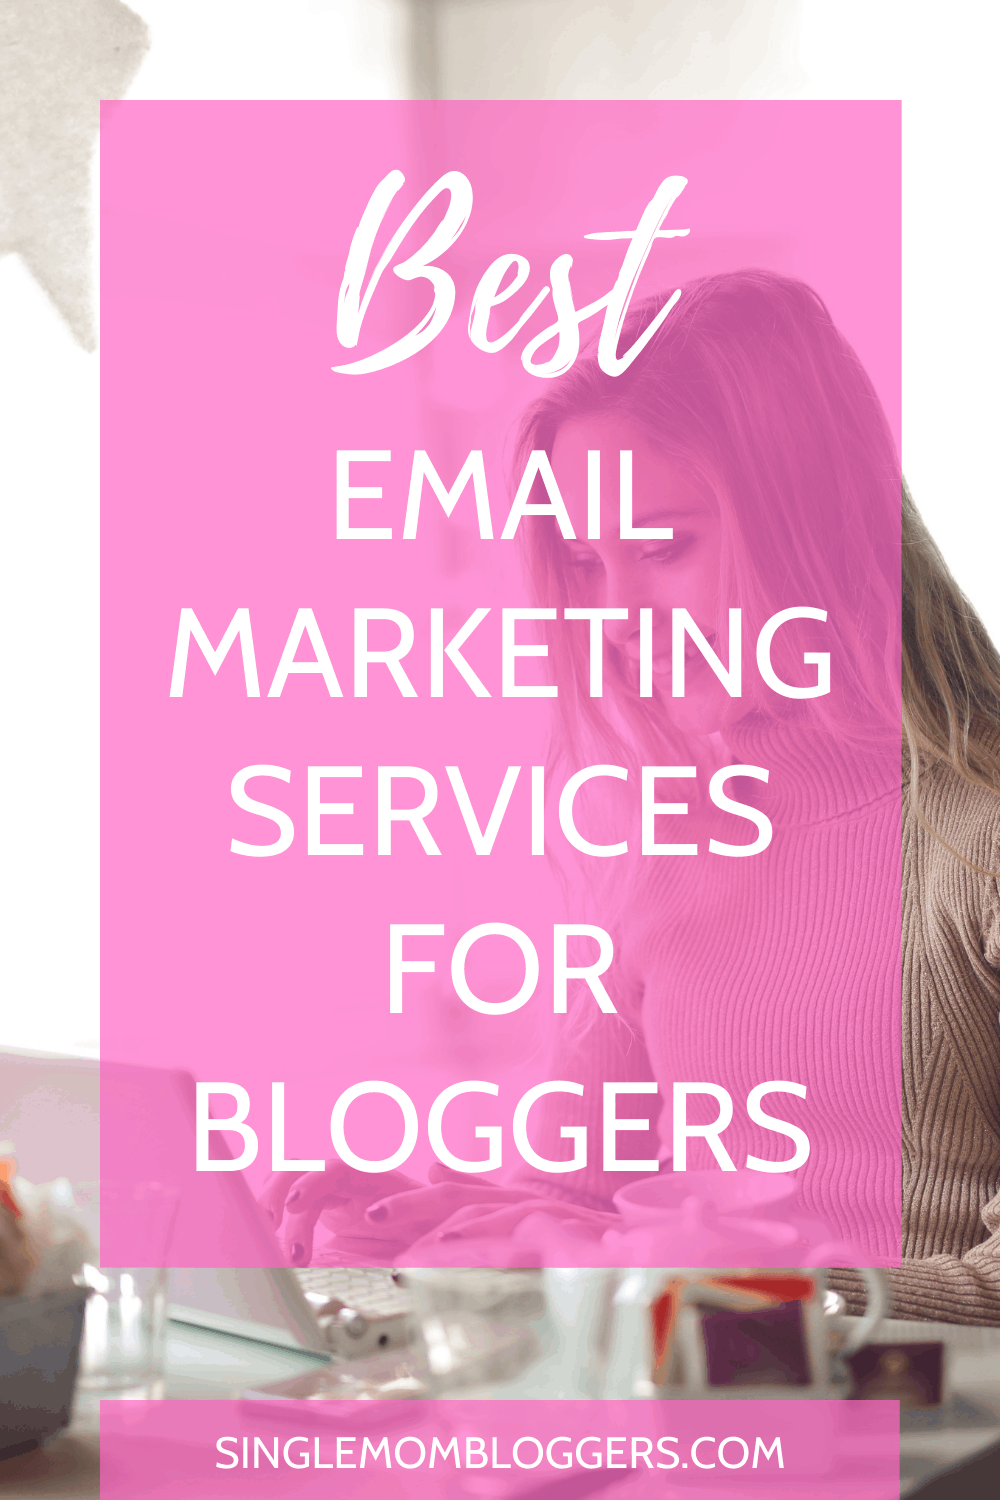 Best Email Marketing Services for Bloggers - Single Mom Bloggers